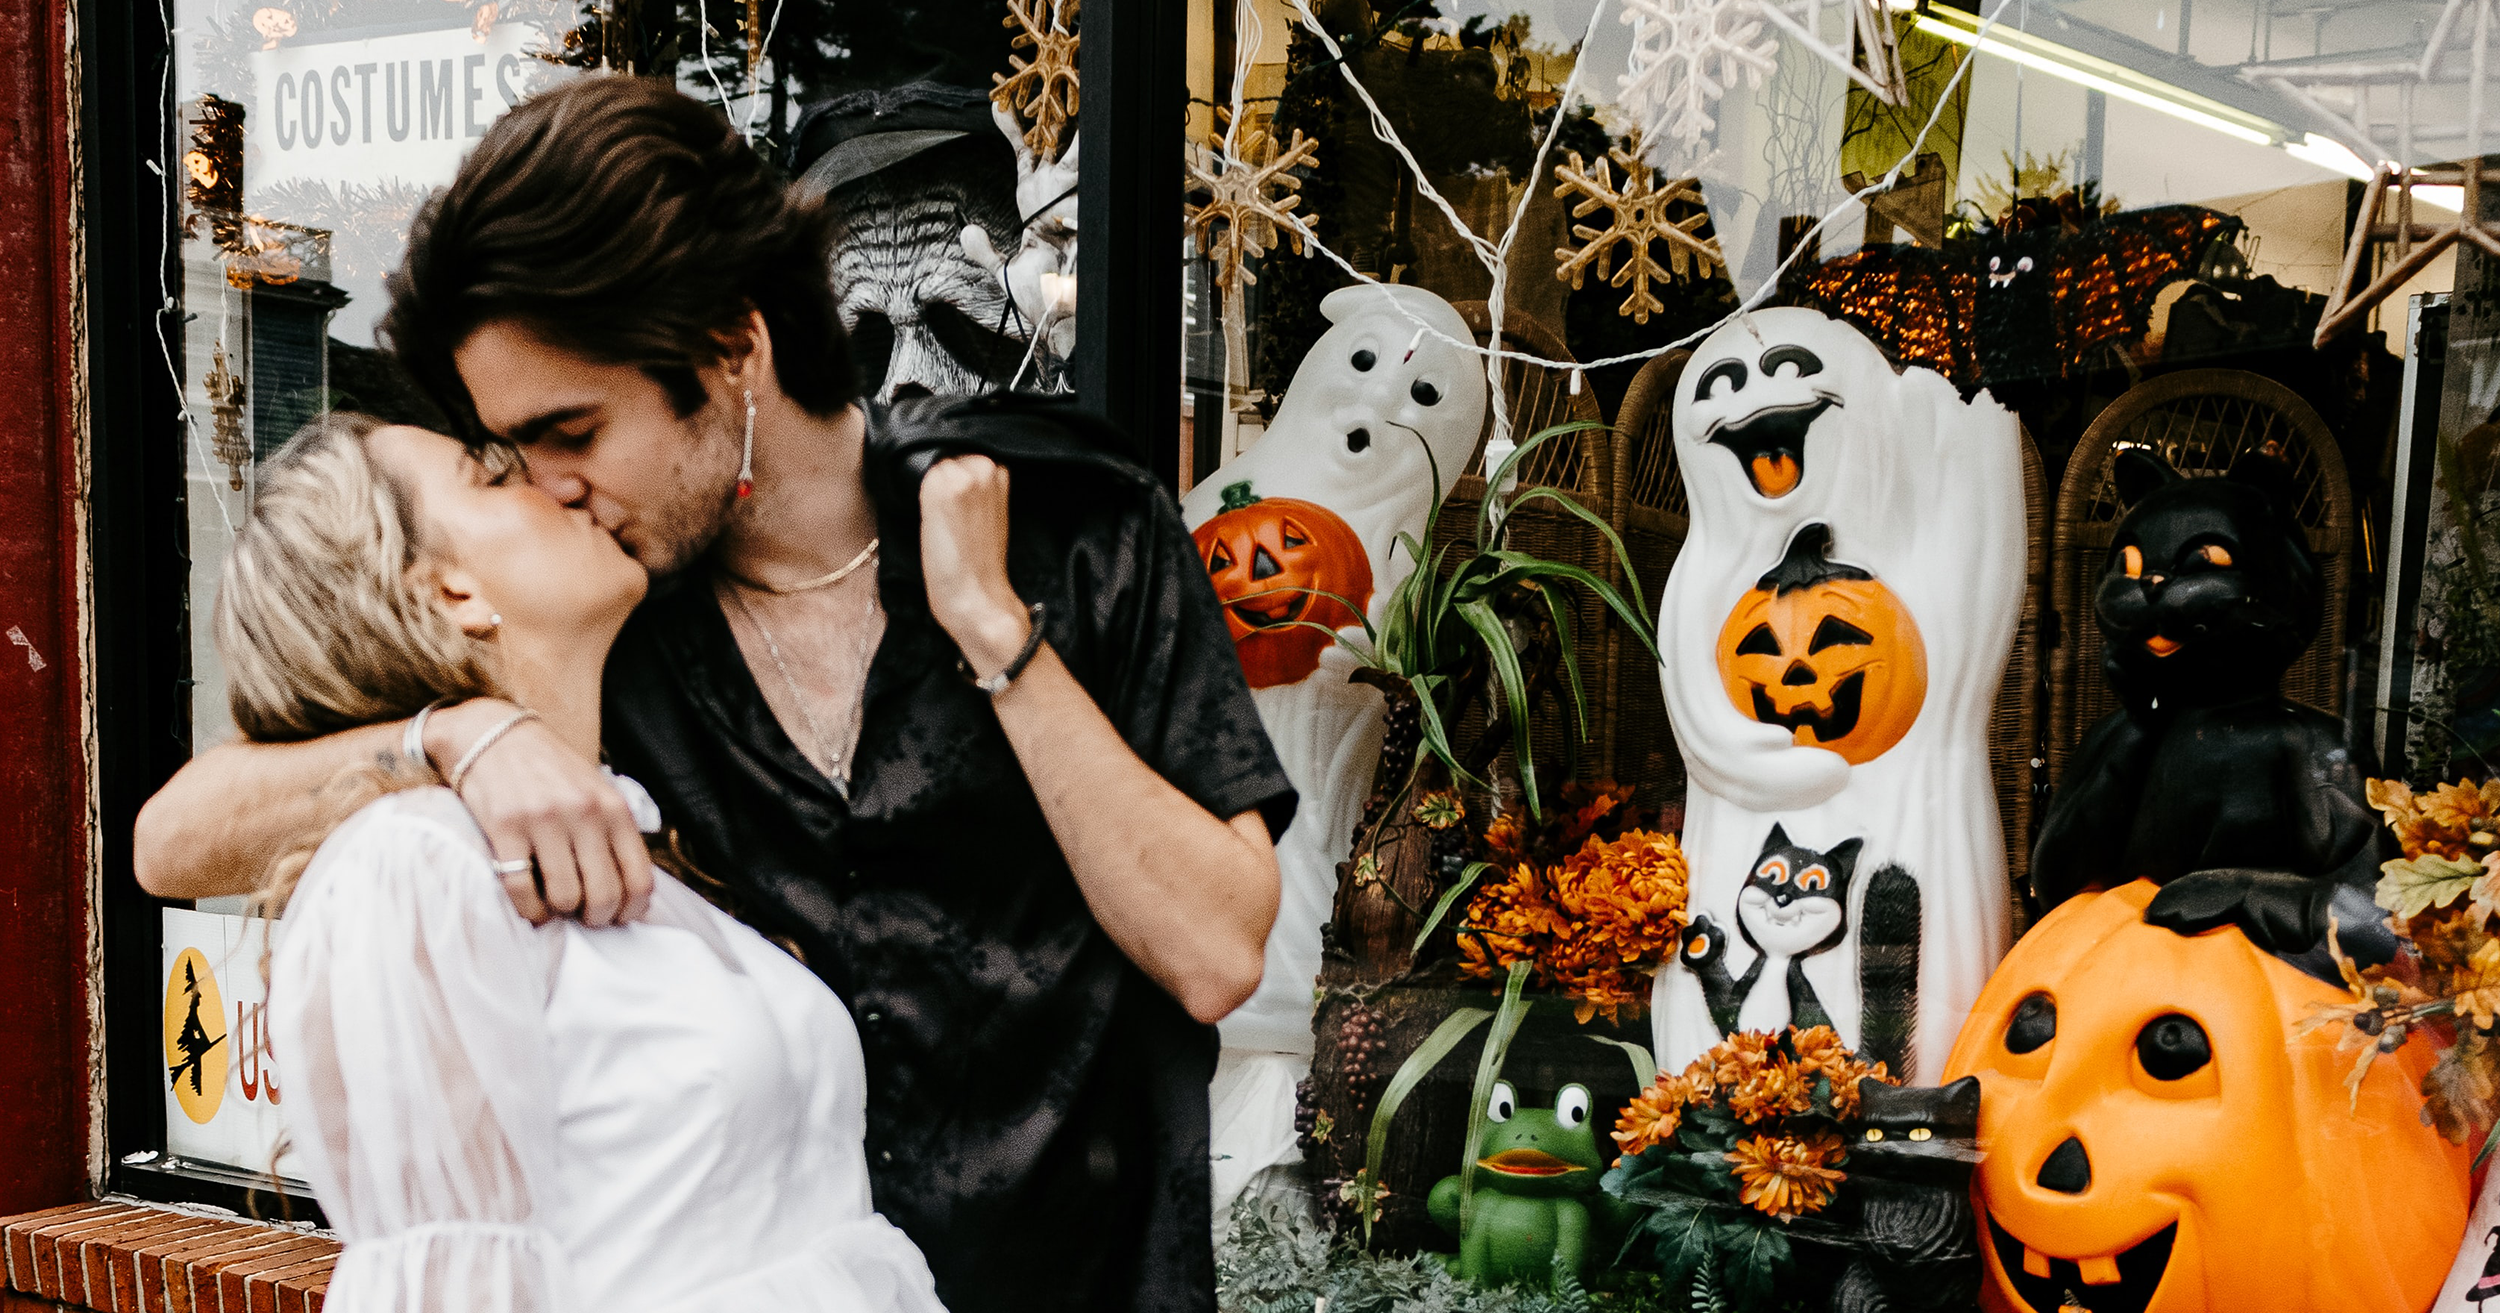 Let’s start a Halloween tradition for couples!